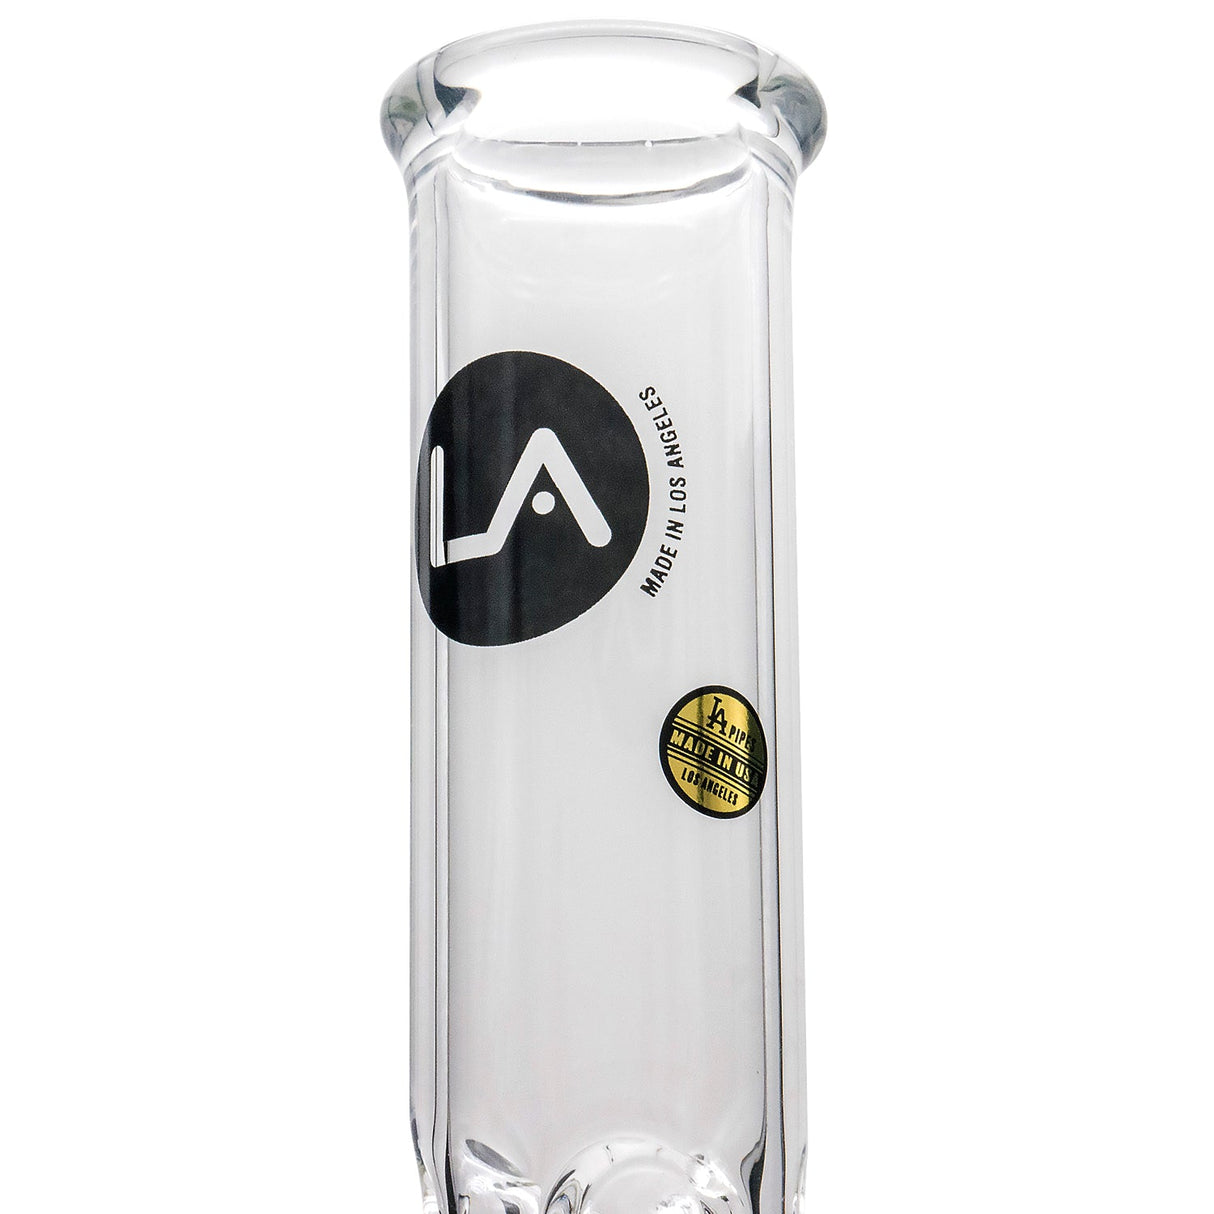 LA Pipes Beaker Bong with Showerhead Perc, Clear Borosilicate Glass, Front View